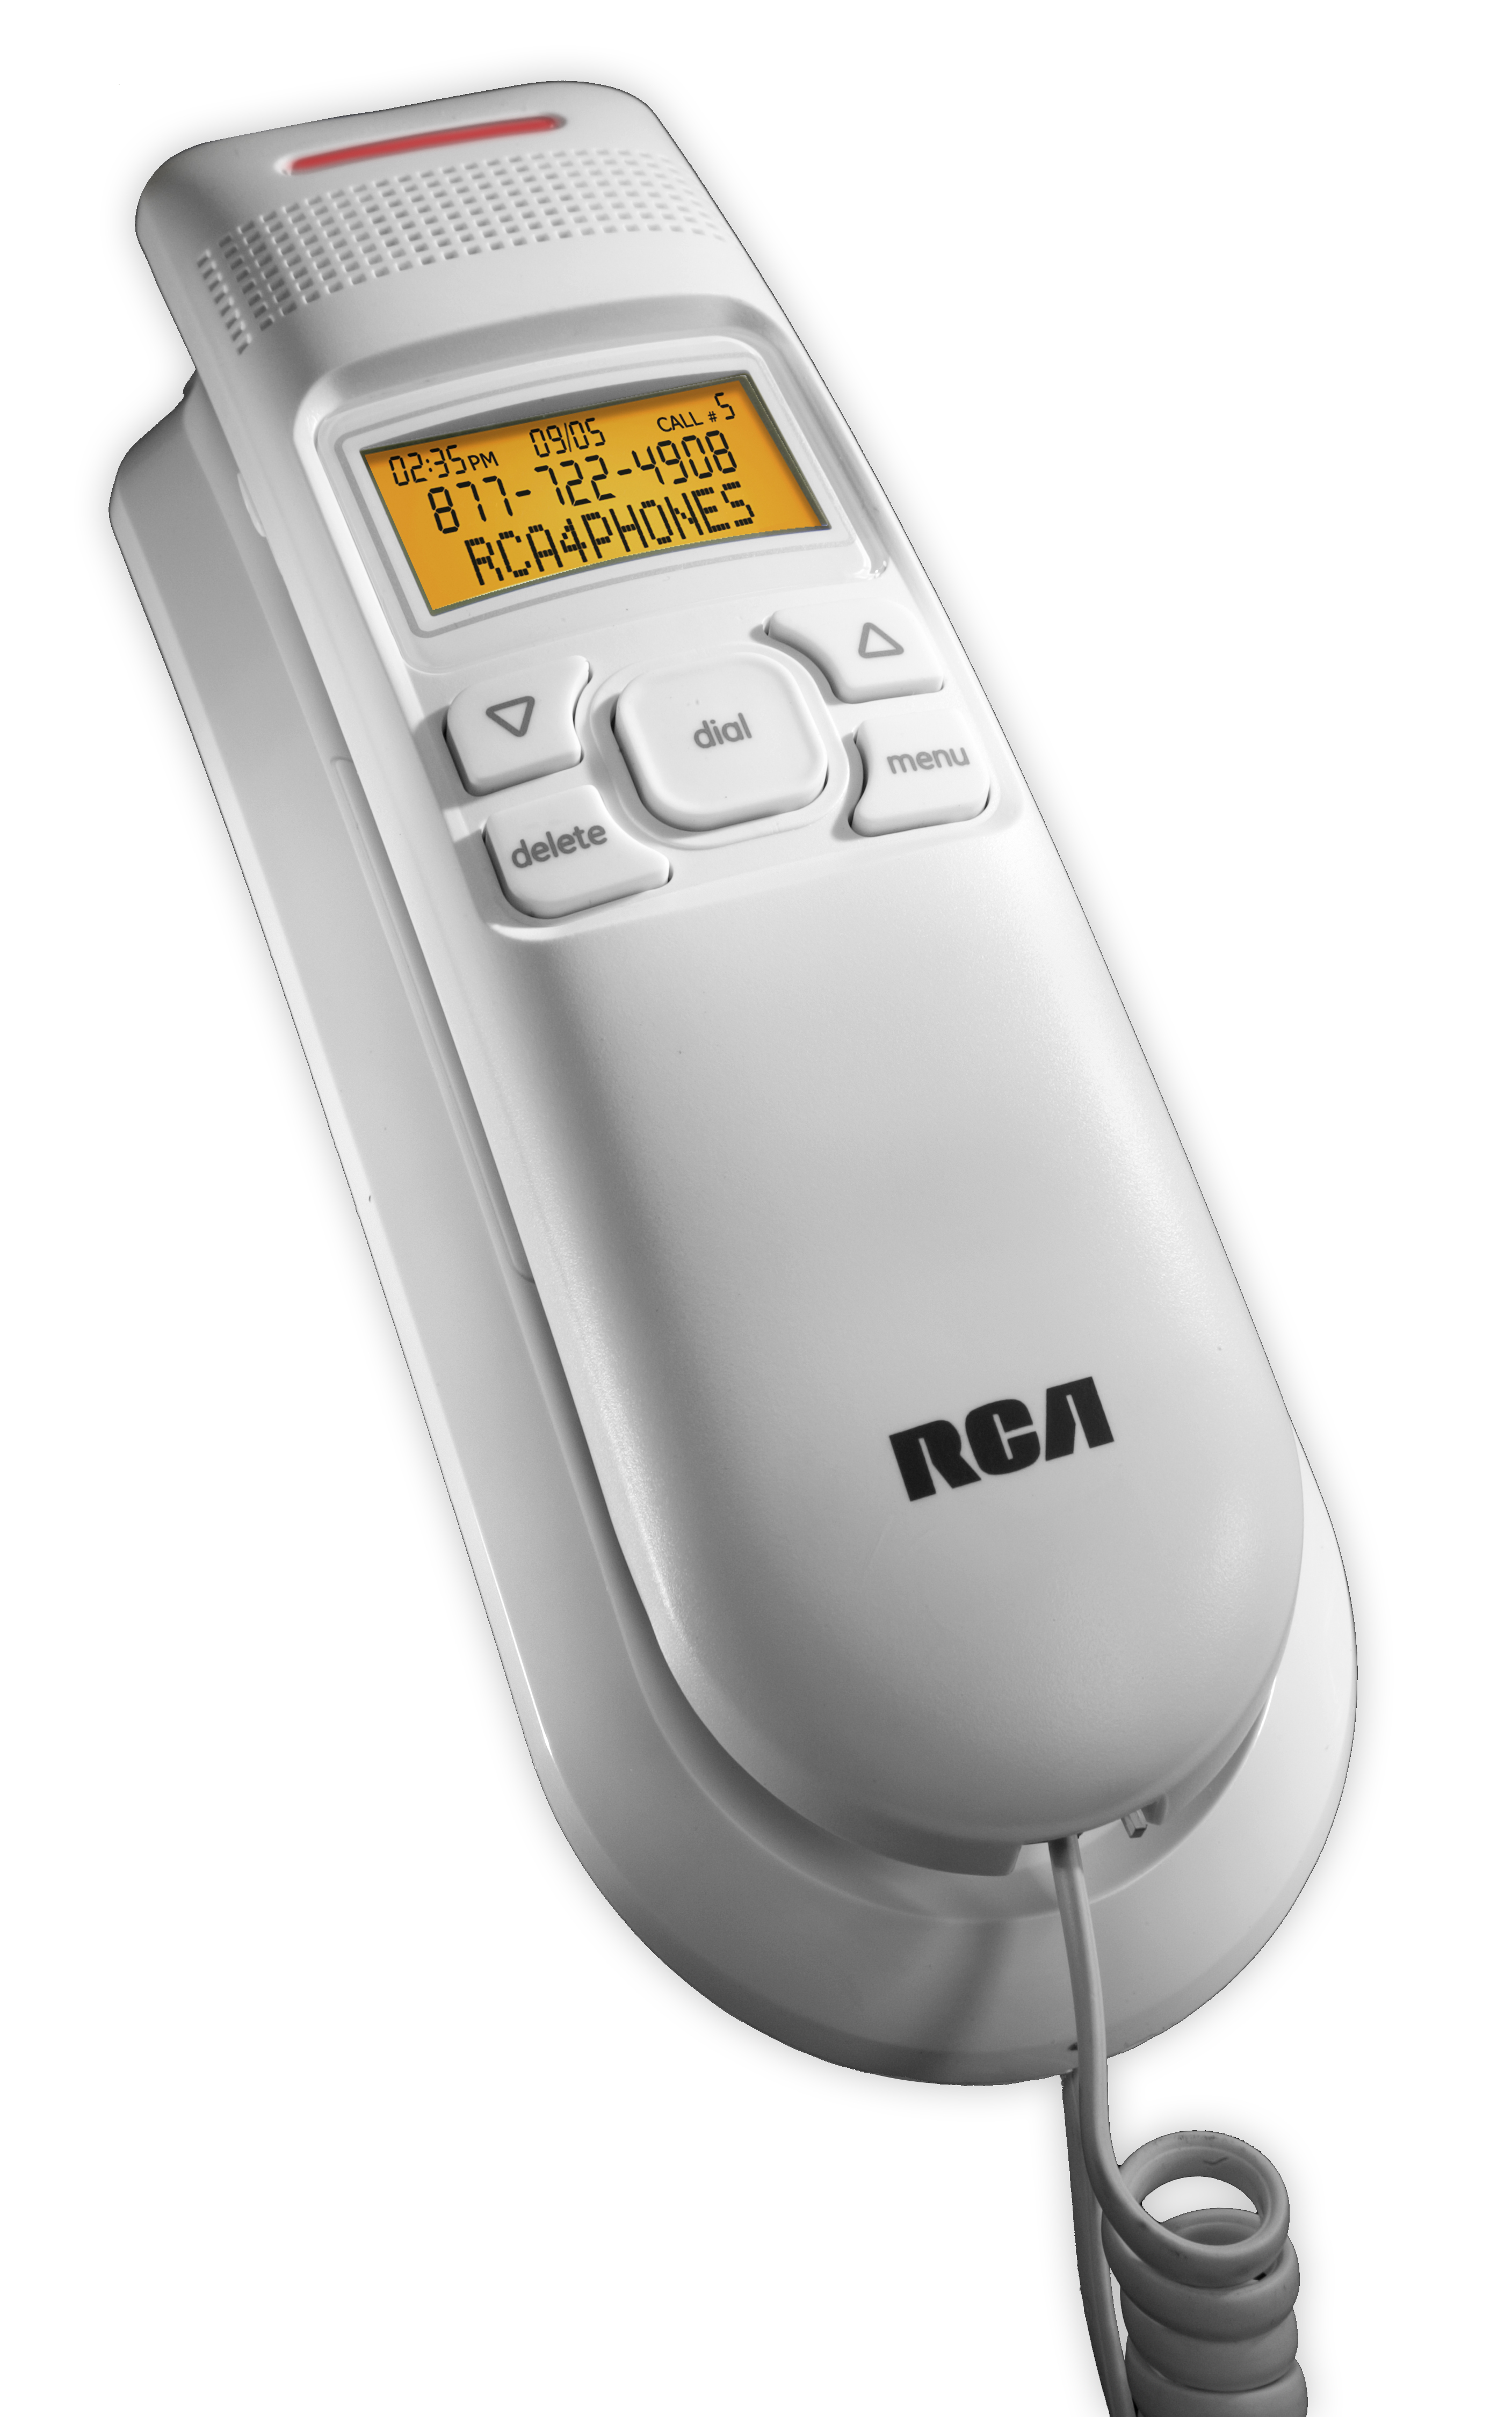 The RCA Model 1122 amplified trimline phone is suitable for mild hearing loss and features caller ID.